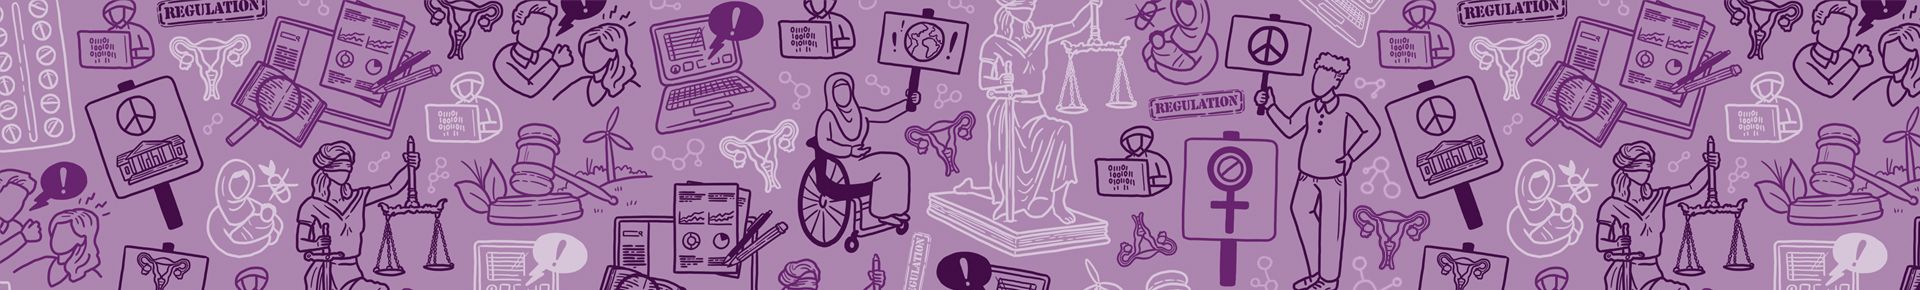 drawn images of people standing and sitting in wheelchair holding protest signs, law symbols on a light purple background